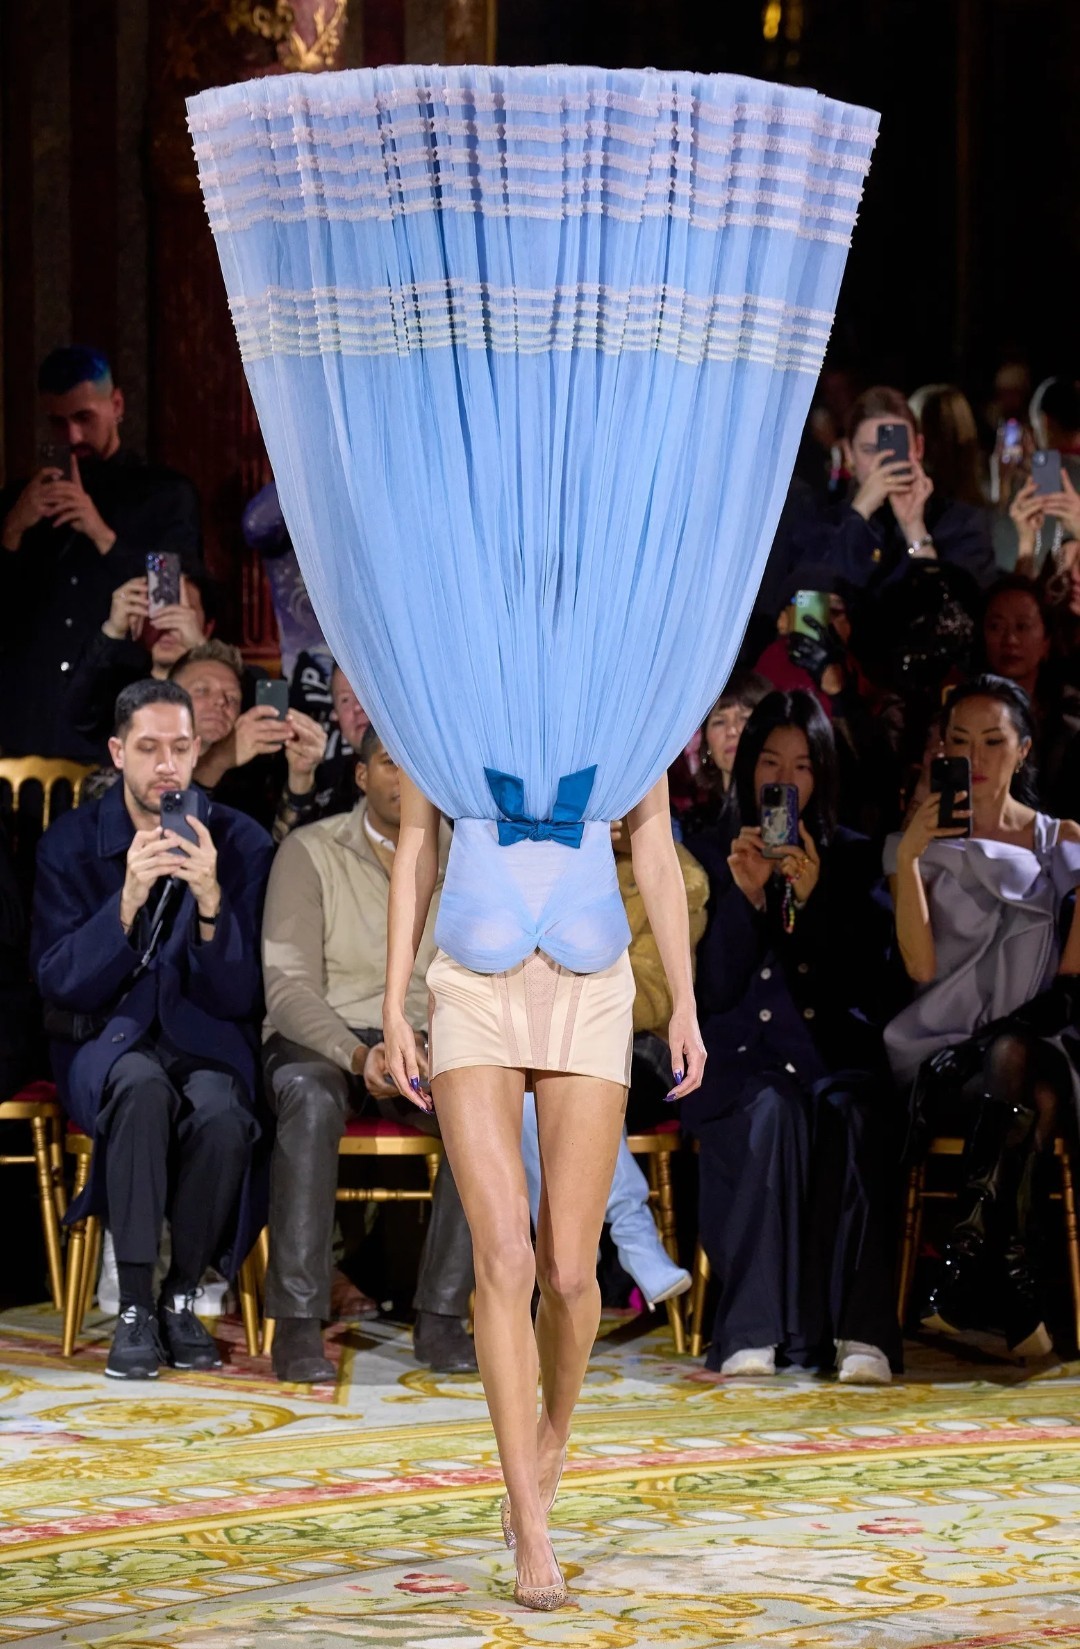 Wearing skirts upside down – the “goofy” way of the high fashion world ...